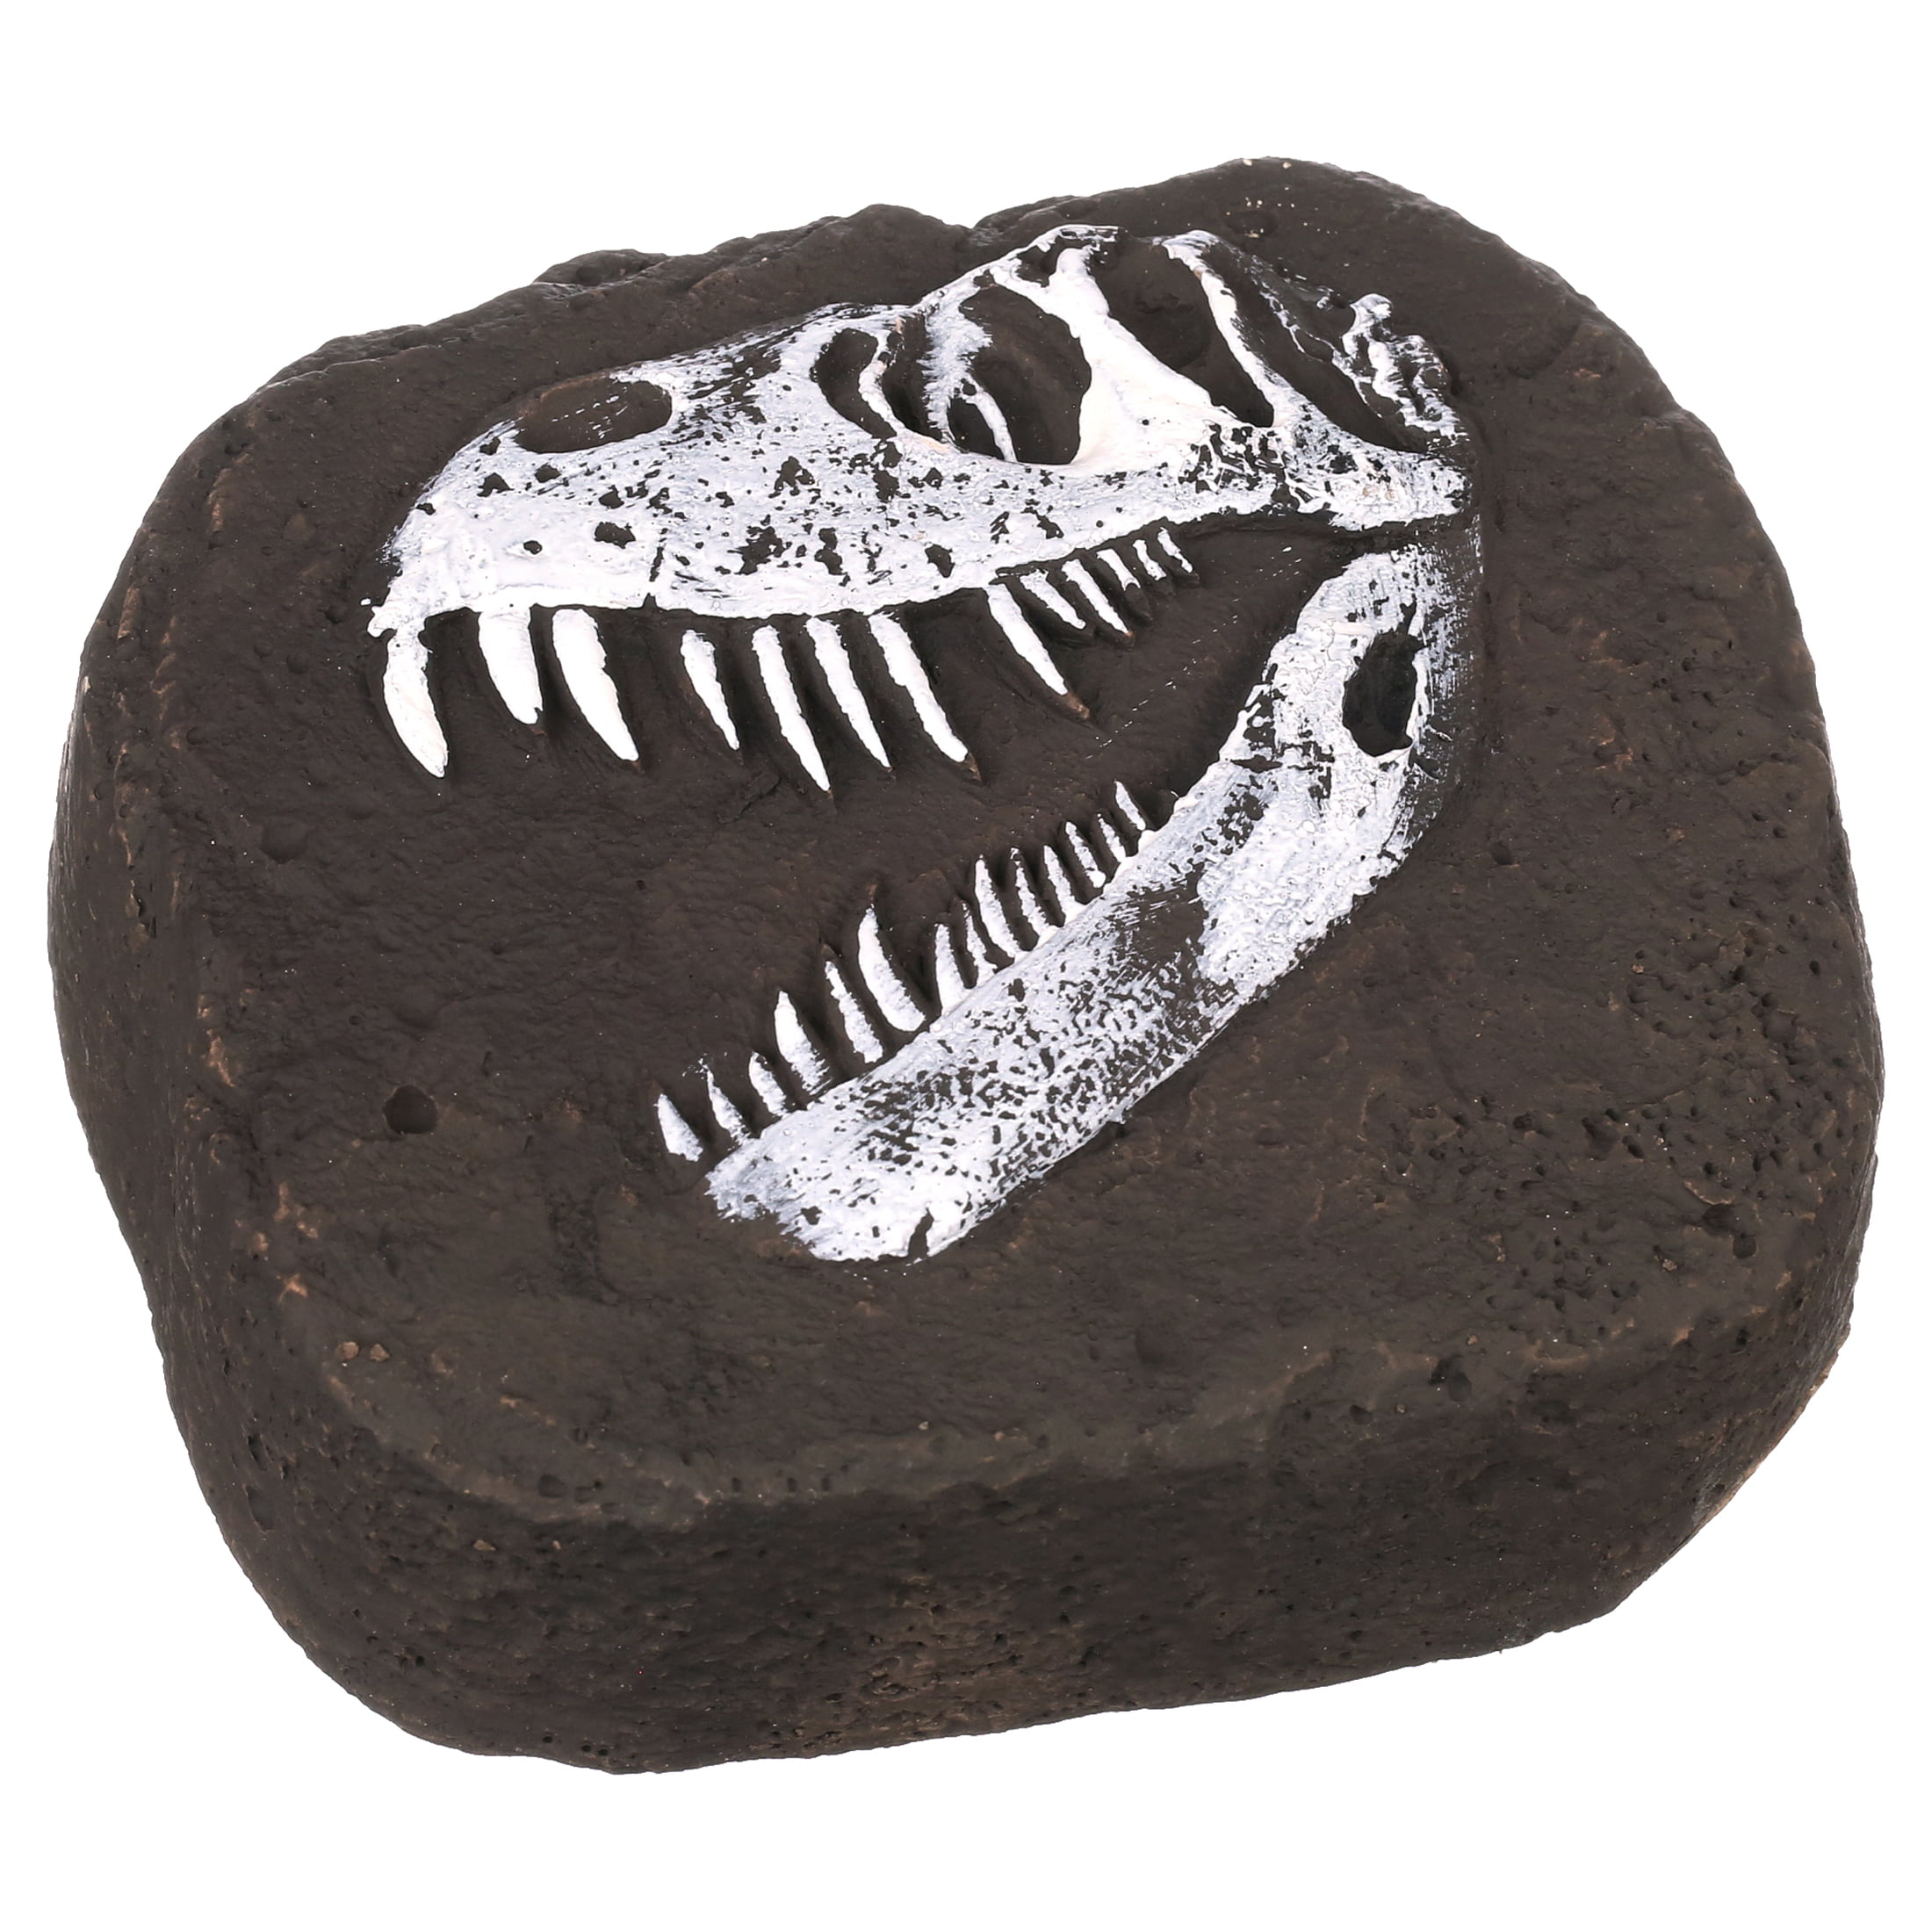 Great Jurassic Science gift for Paleontology and Archeology enthusiasts of any age NATIONAL GEOGRAPHIC Dino Fossil Dig Kit Excavate 3 real fossils including Dinosaur Bones & Mosasaur Teeth 